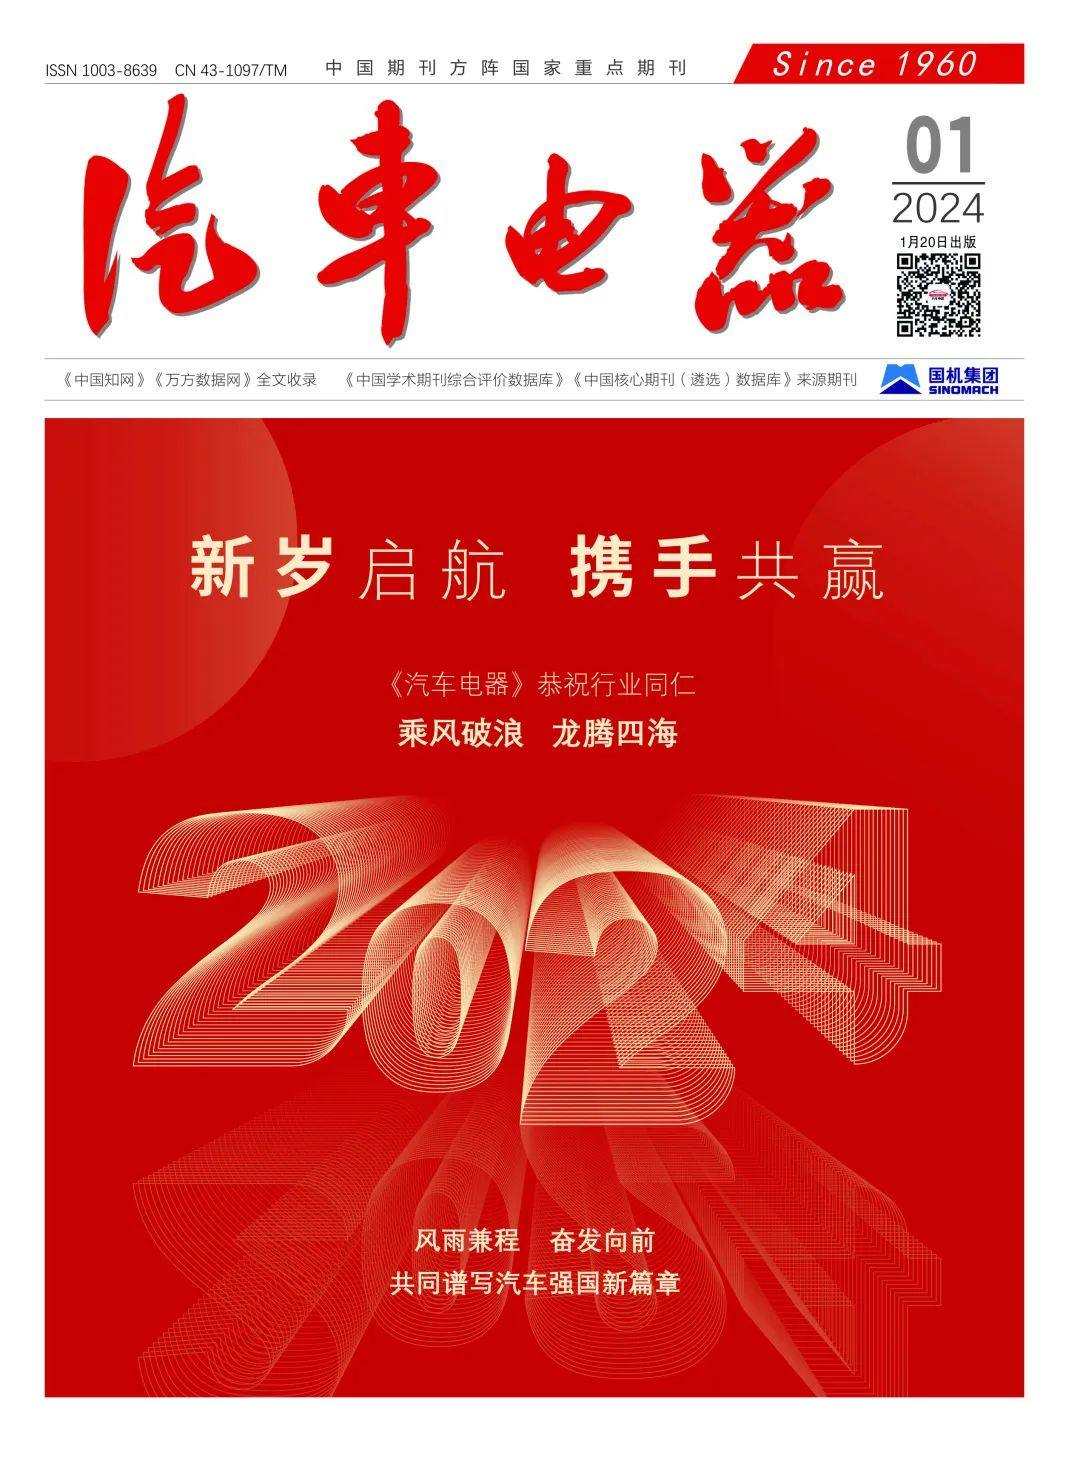 Member News丨Hubei Daily: A big market for small products, recognized by more than 40 OEMs